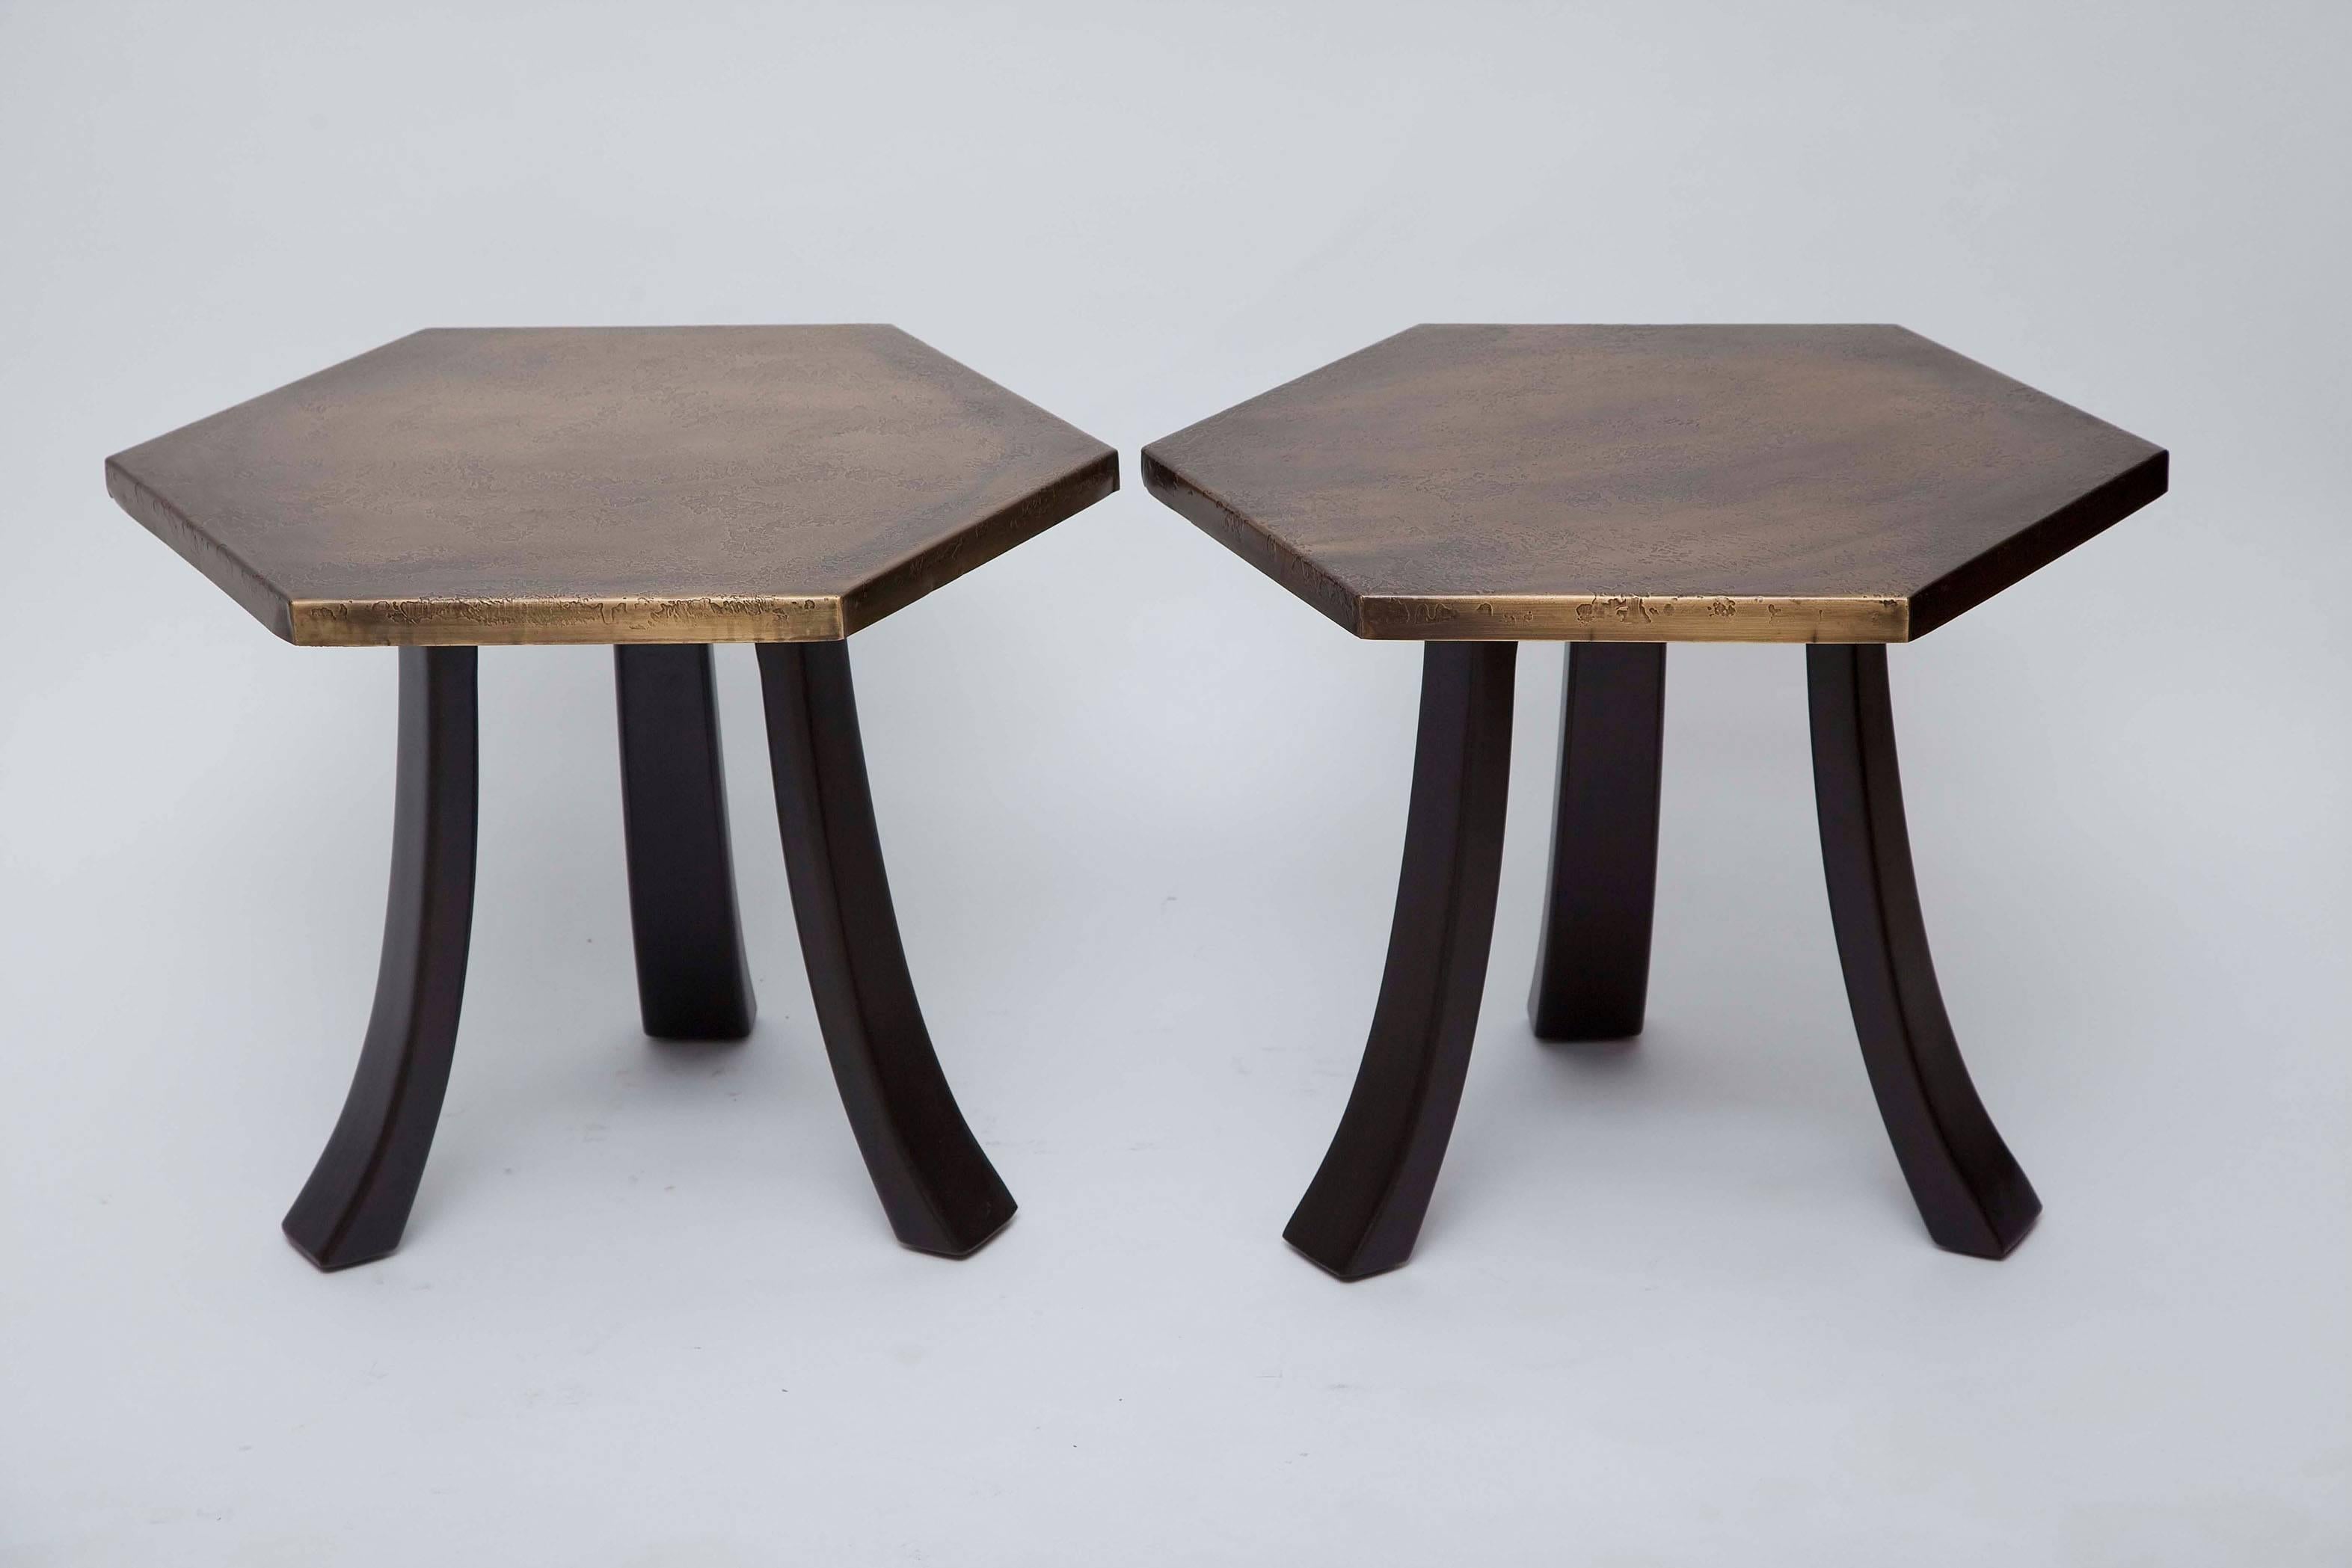 Pair of Harvey Probber side tables with walnut legs and hexagonal tops covered in patinated etched brass. Make a unique coffee table when clustered with our hexagonal Probber terrazzo or John Keal pebbled resin tables side tables!